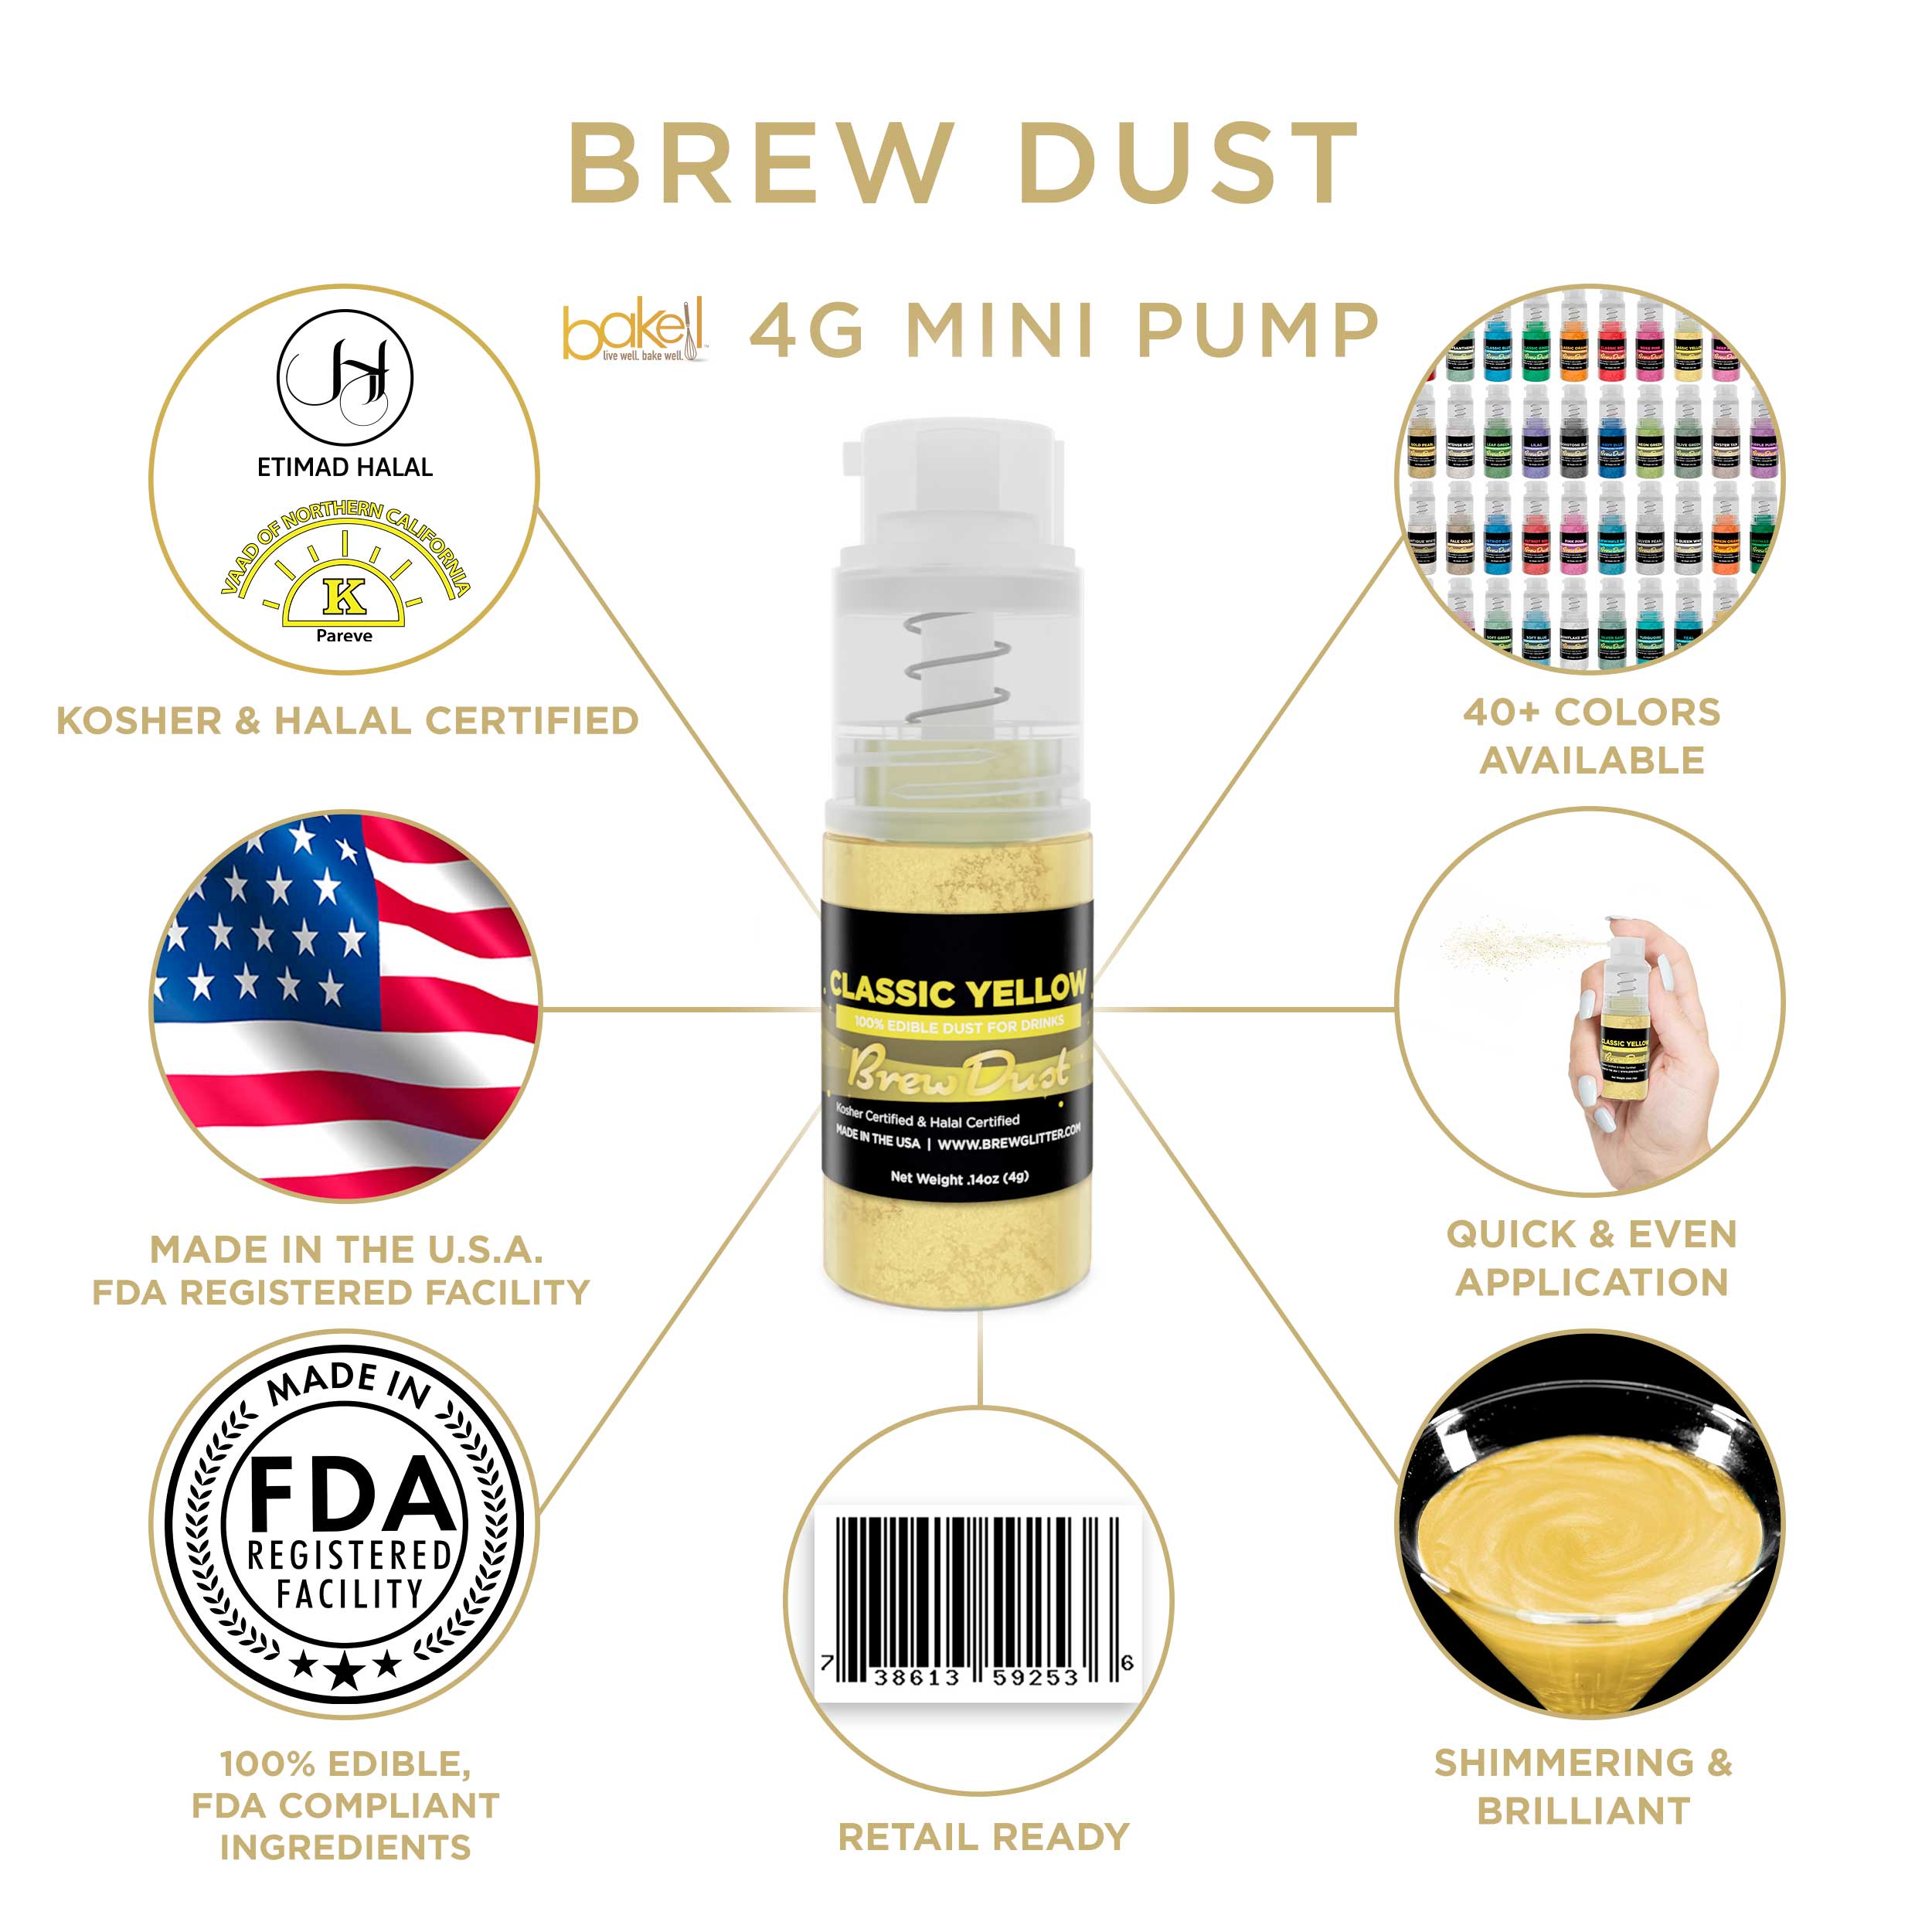 Classic Yellow Brew Dust Miniature Spray Pump | Infographic and Information